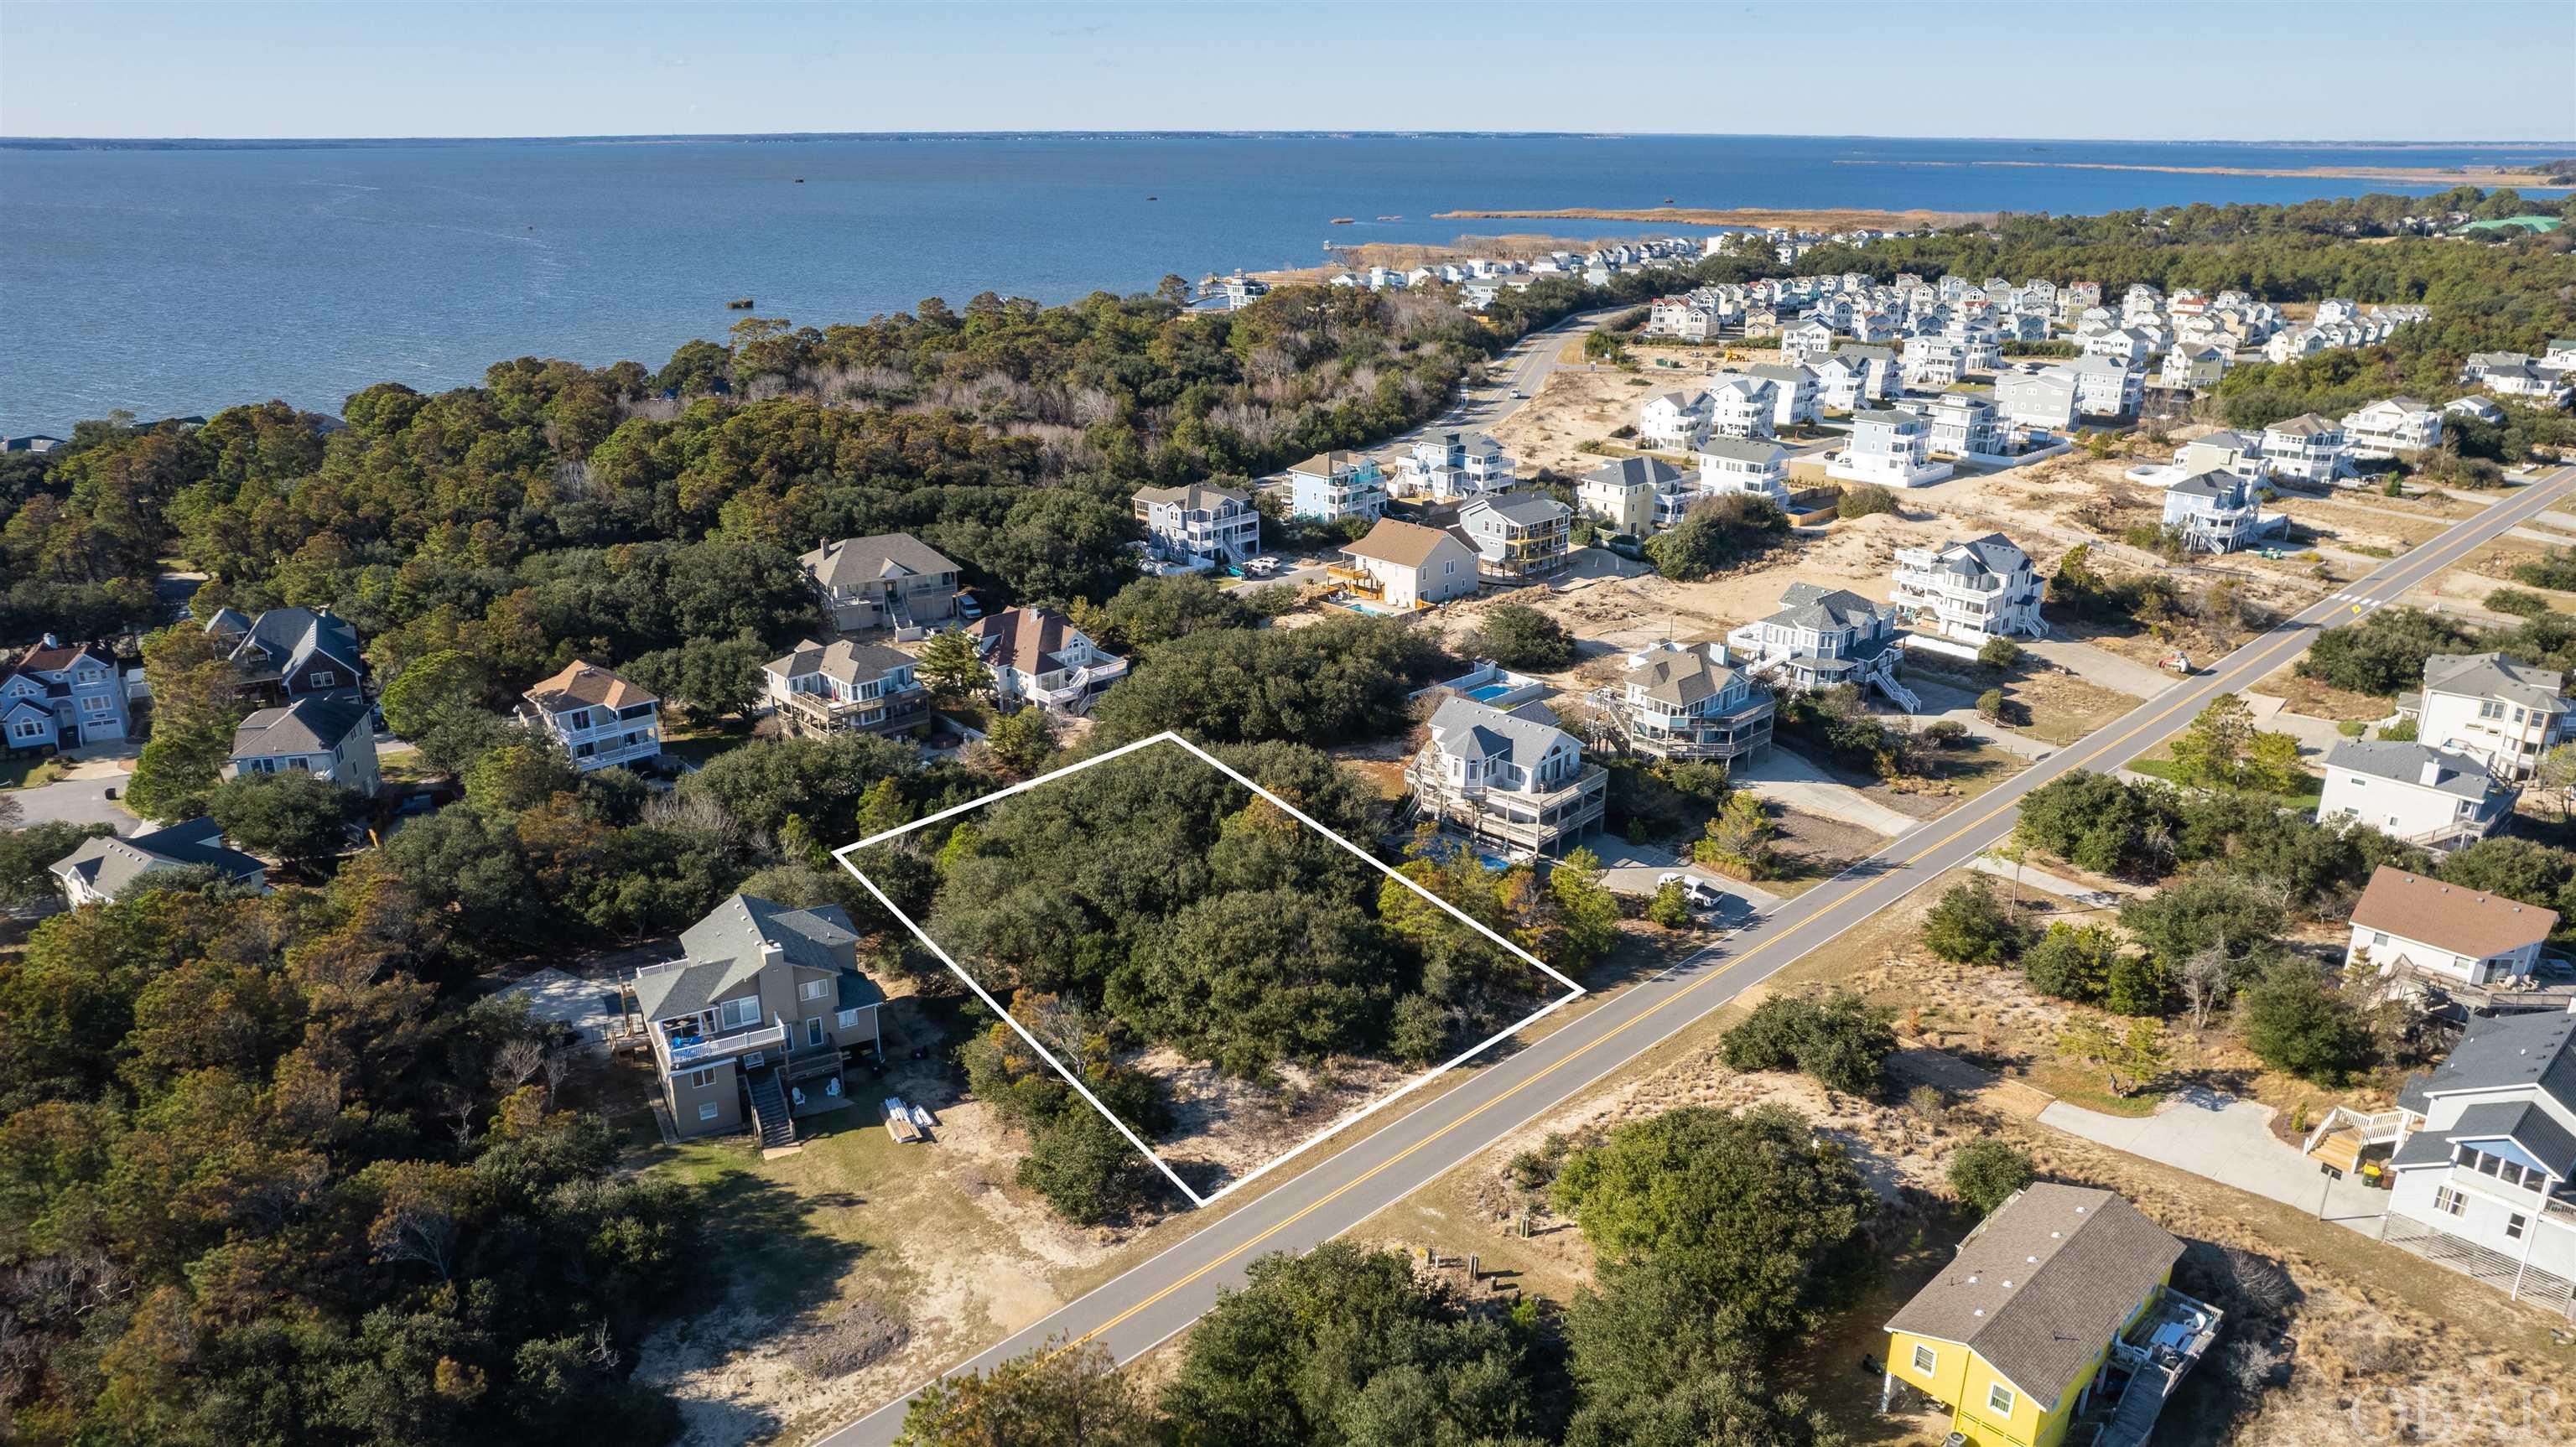 Outstanding opportunity to build your dream beach house or hold an as investment!  This 6th row homesite offers so many possibilities on the large 20,000 square foot lot.  The homesite is large enough to accommodate a generous rental home or build a modest home and enjoy the privacy of a large lot.  Short walk to the beach or bike to nearby shops and restaurants.  Whalehead is host to some of the most beautiful beaches anywhere on the Outer Banks.  No HOA fees!  Ask about the construction package option!